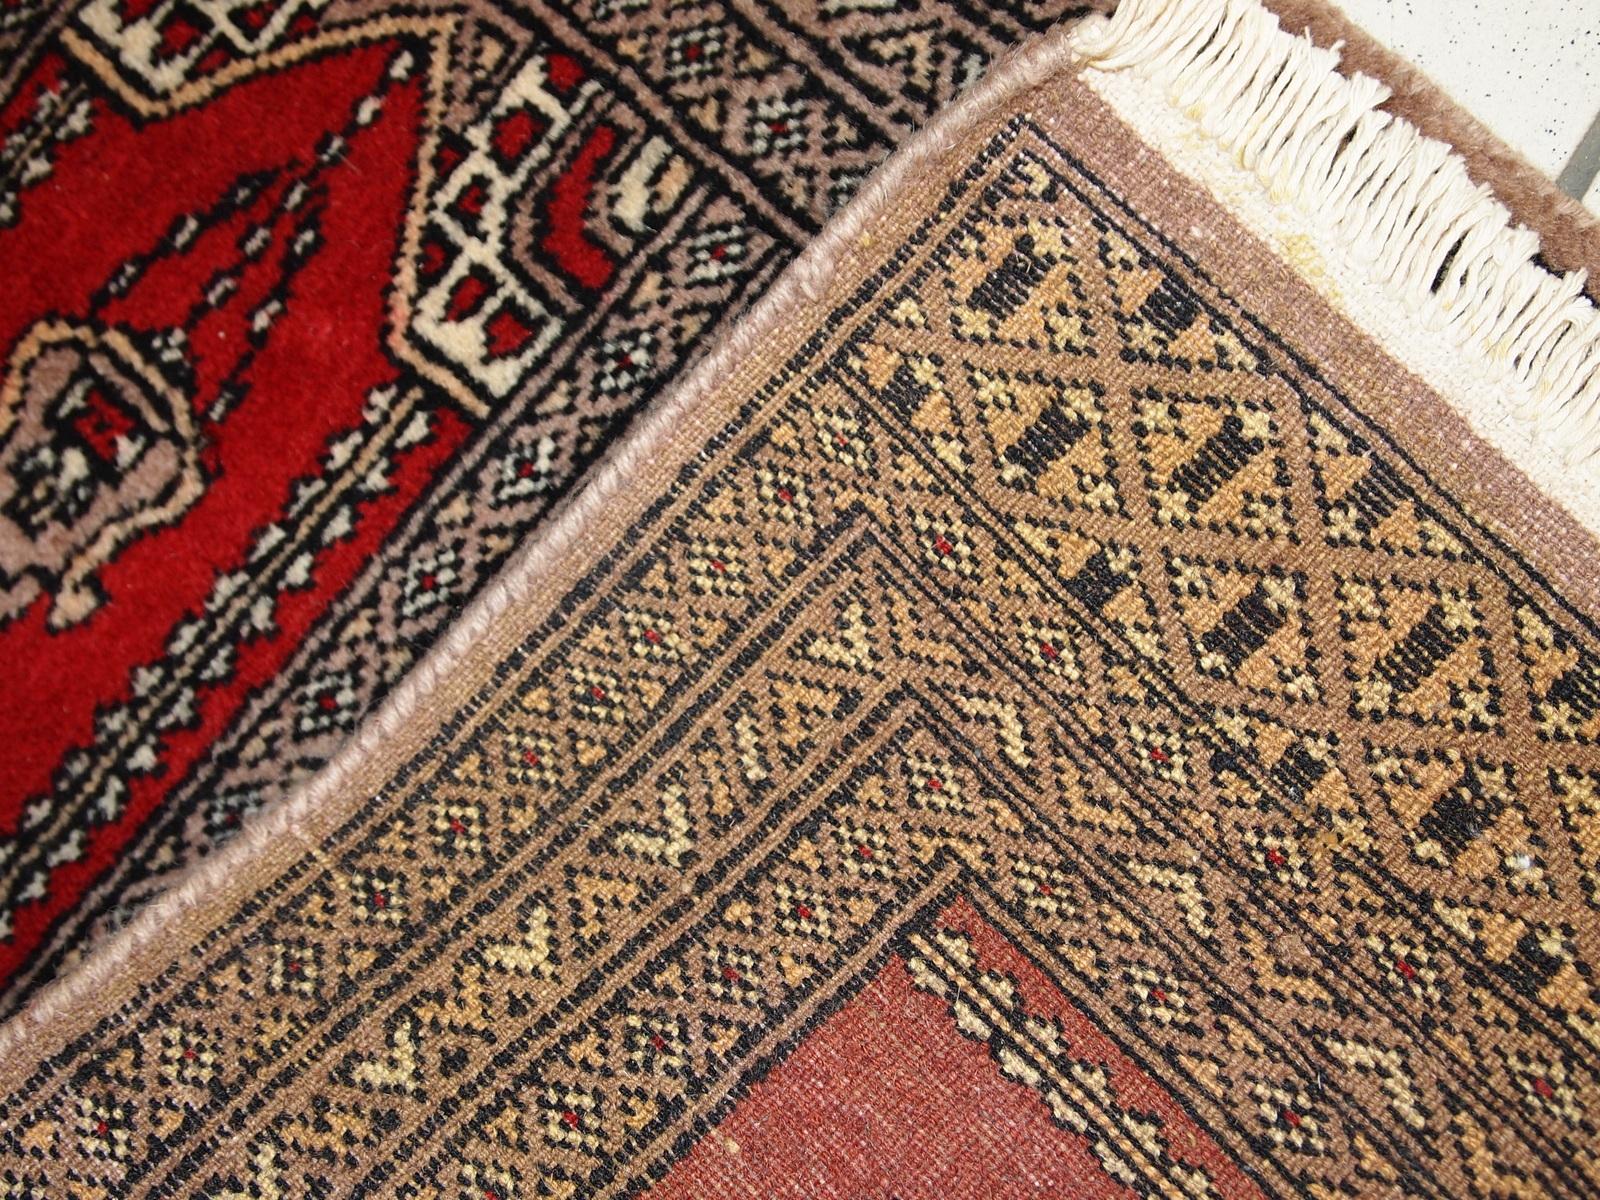 Handmade vintage small rug from Uzbekistan for praying. It is in original good condition from the end of 20th century.

-Condition: original good,

-circa 1970s,

-Size: 1.5' x 3.3' (45cm x 101cm),

-Material: wool,

-Country of origin: